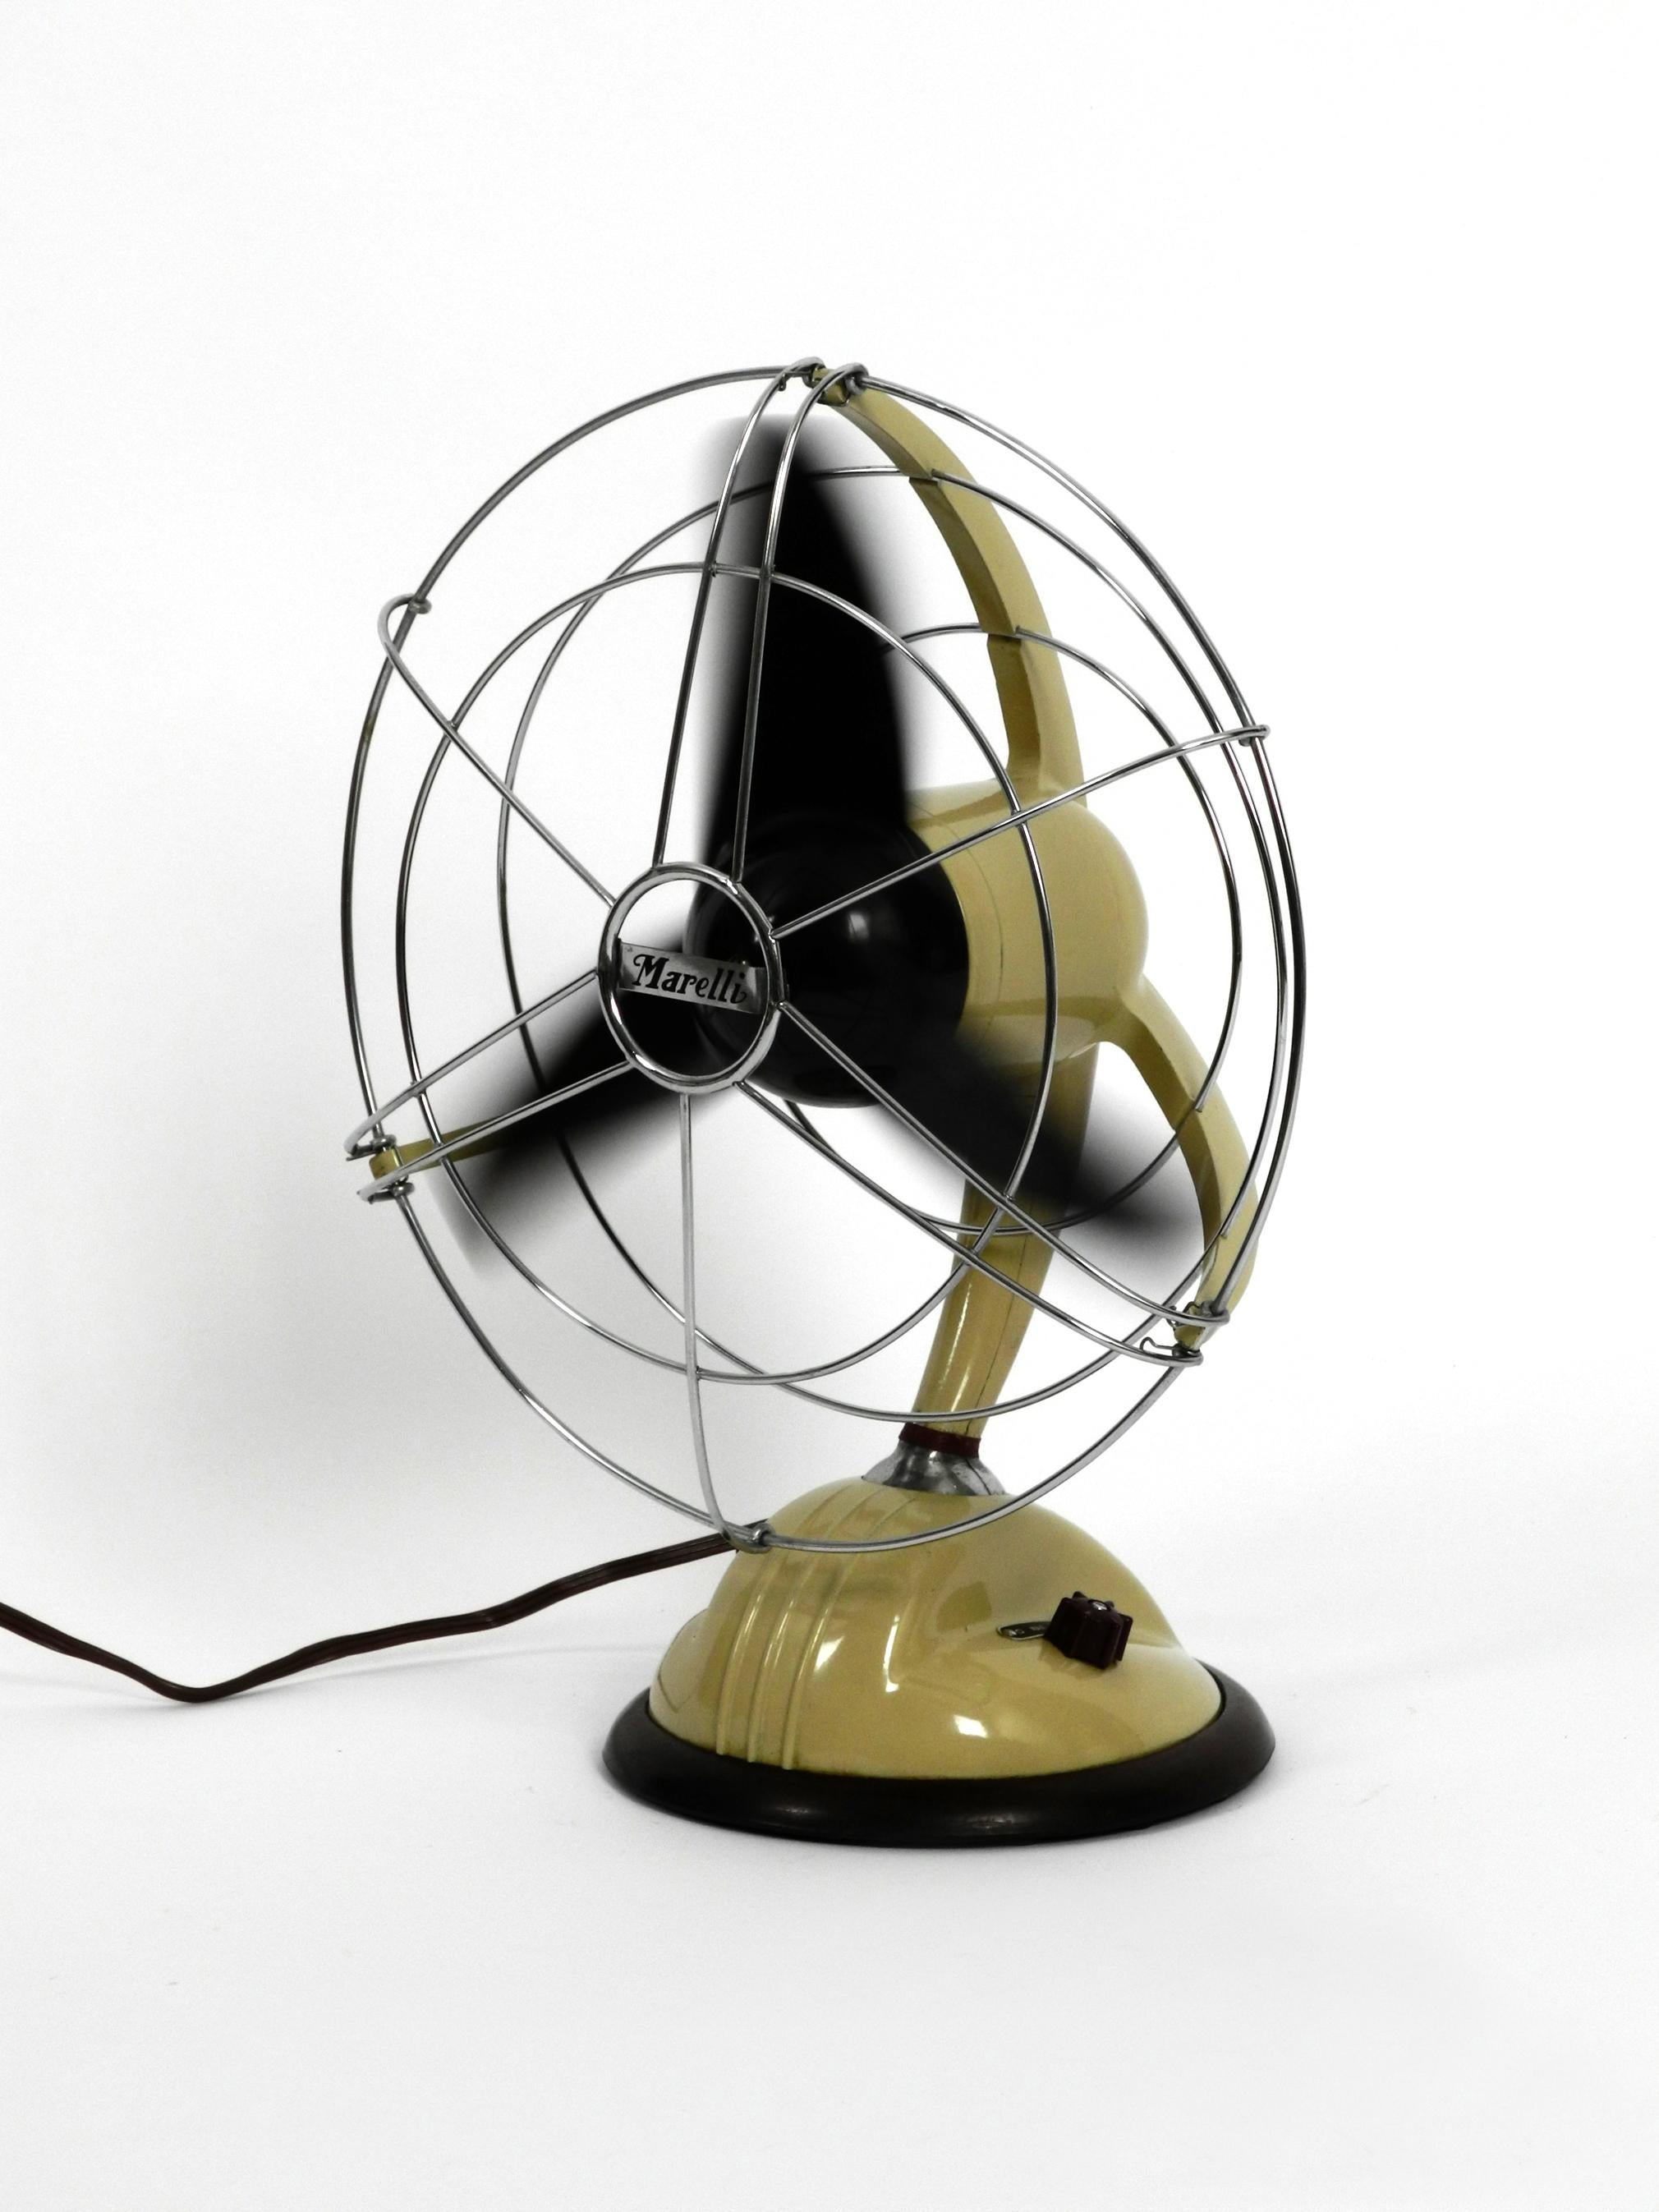 Original 1960s Streamline Table and Wall Fan by Marelli Mod. 304 Made in Italy 5